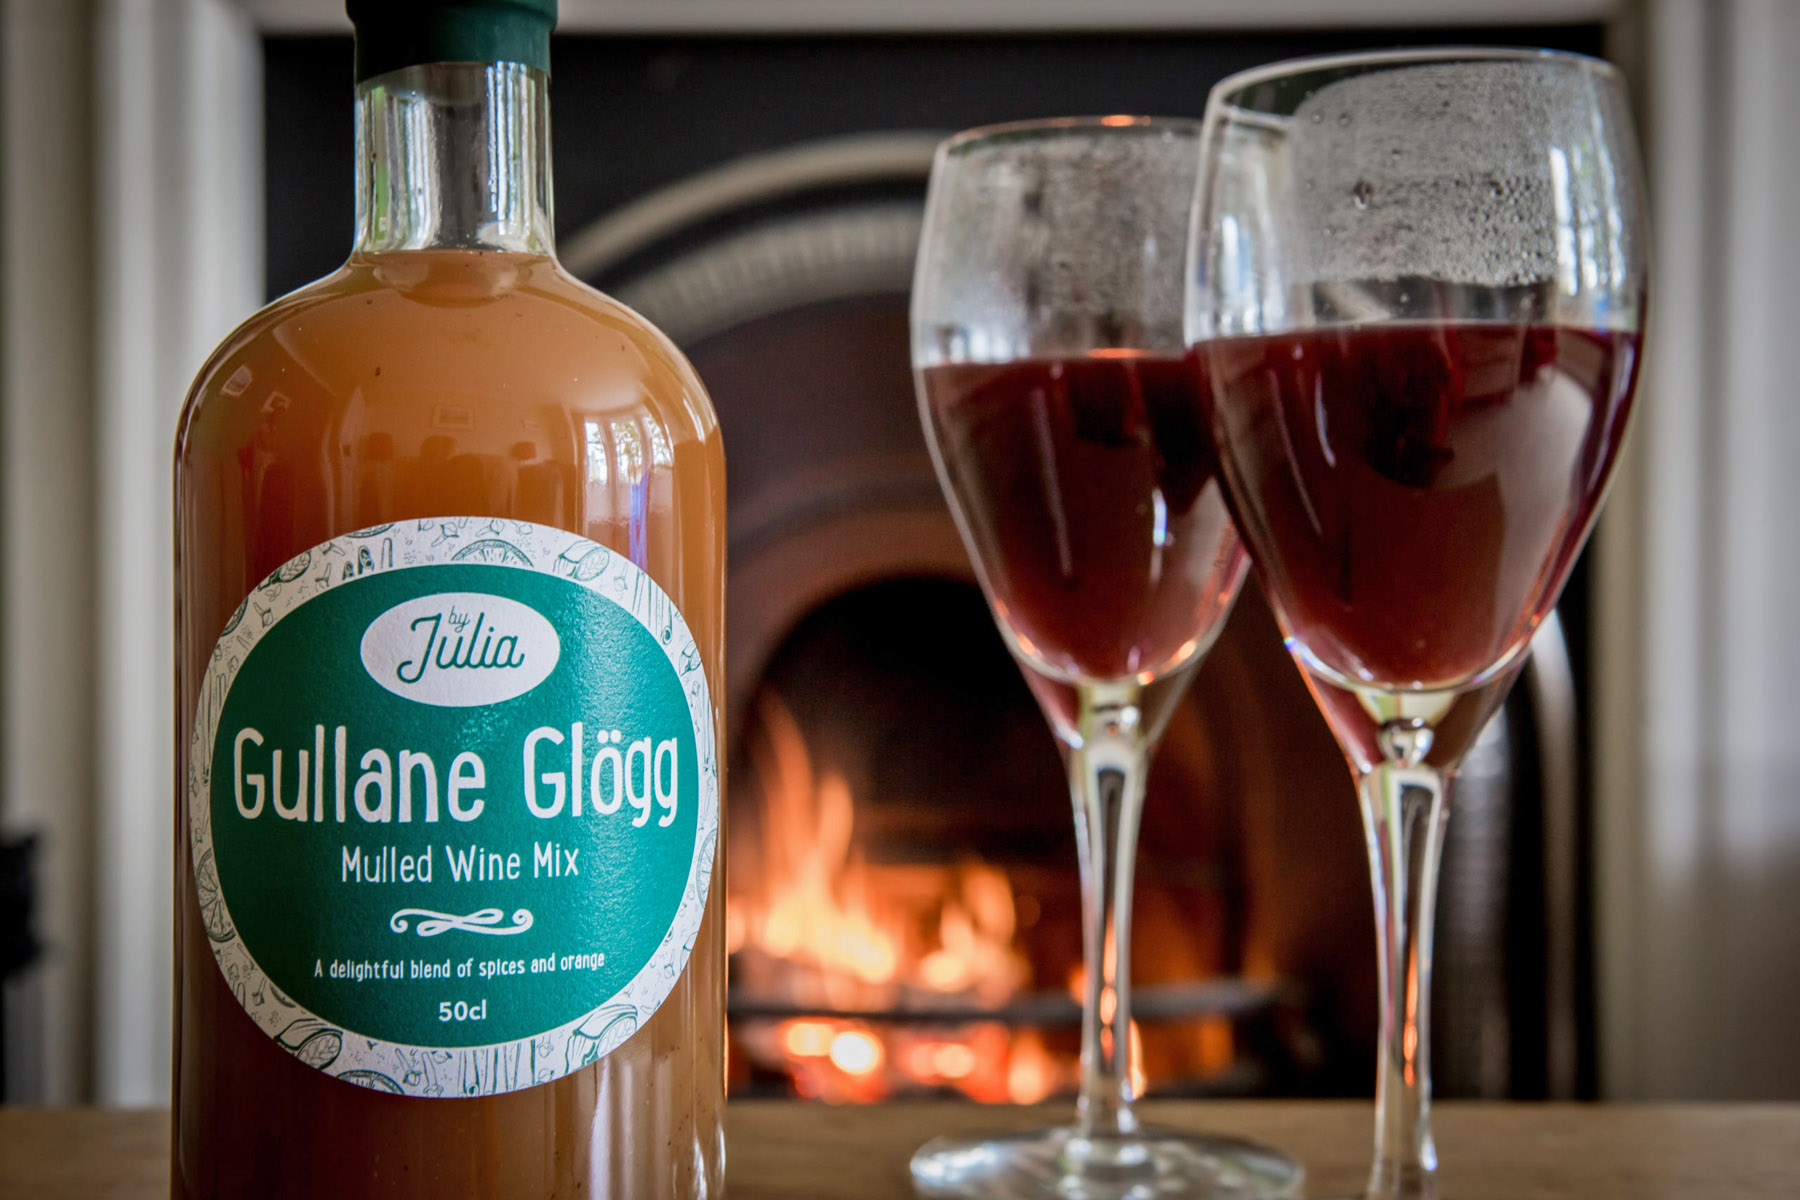 Fruit juice and mulled wine spices in Gullane Glogg from By Julia